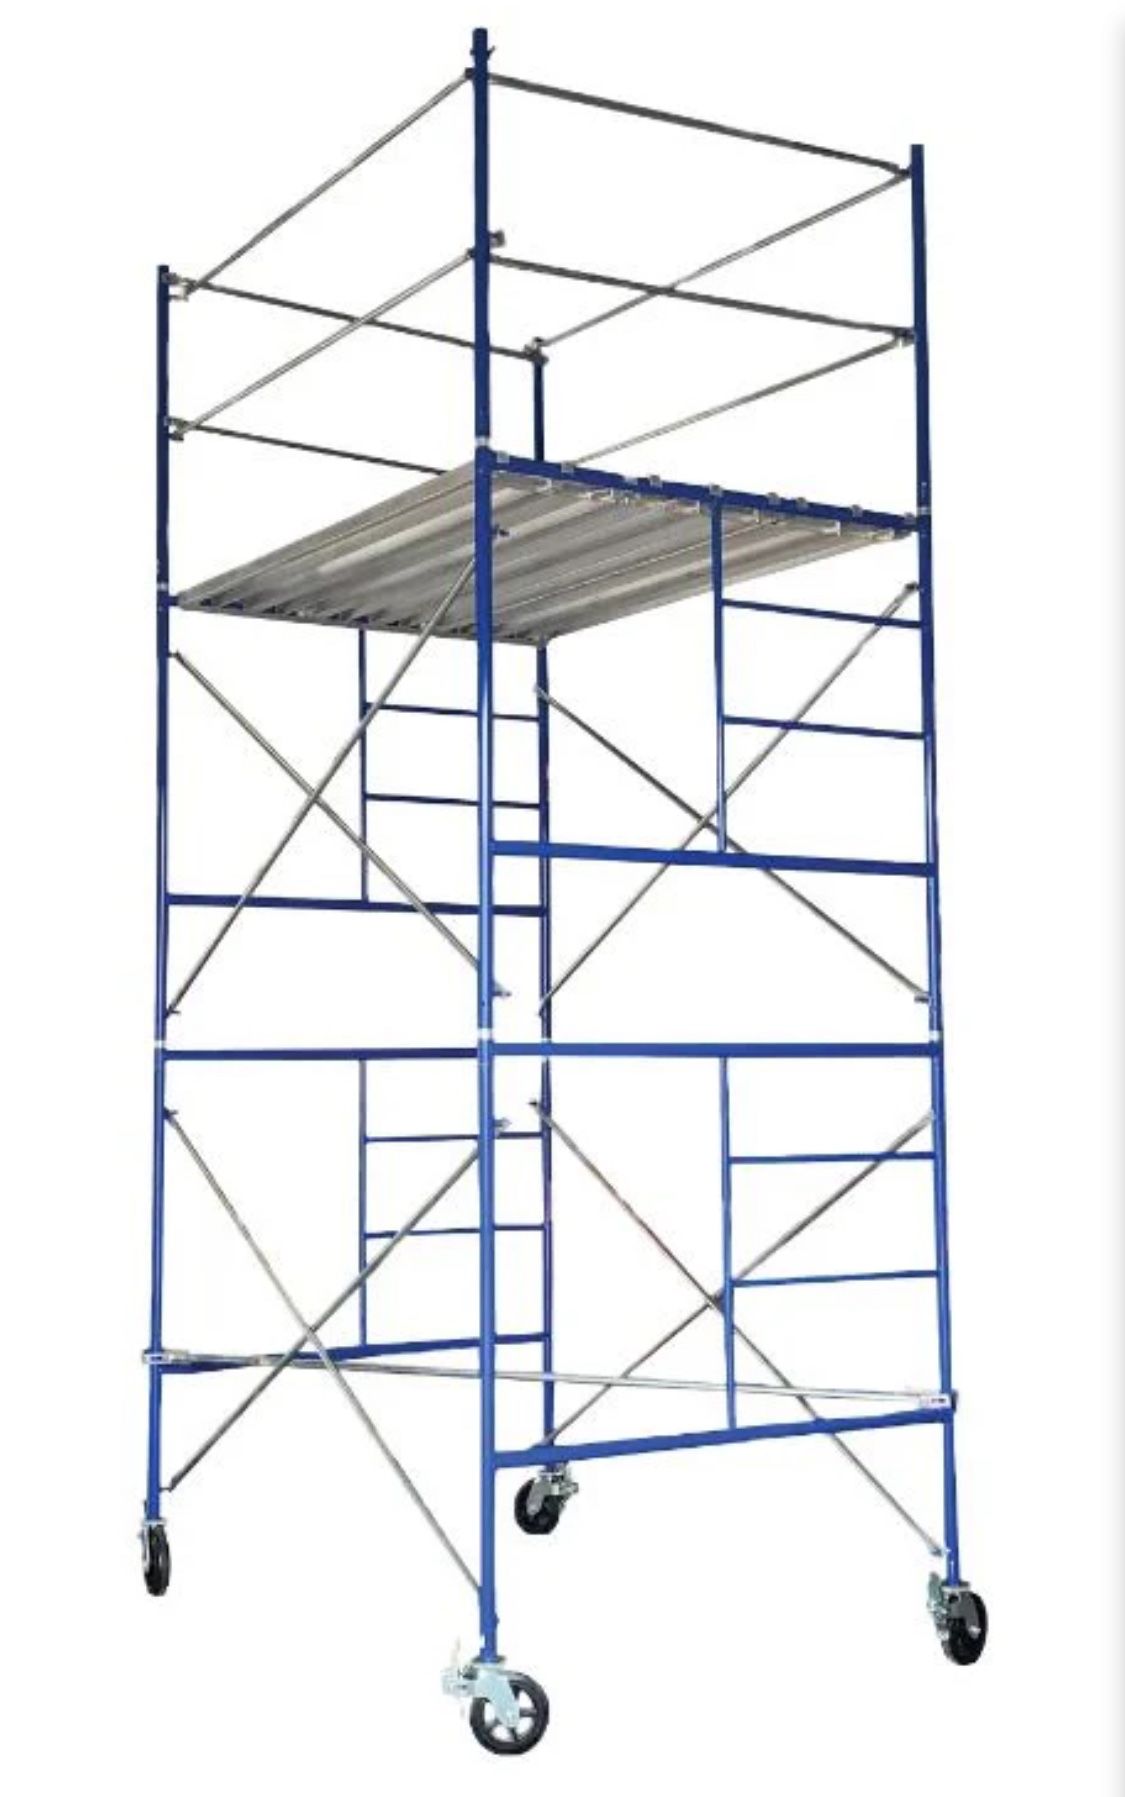 CONTRACTOR SCAFFOLDS ROLLING TOWER SET 11 FT HIGH 7 FT LONG, 5 WIDE W/GUARD RAIL & CASTERS 950.00